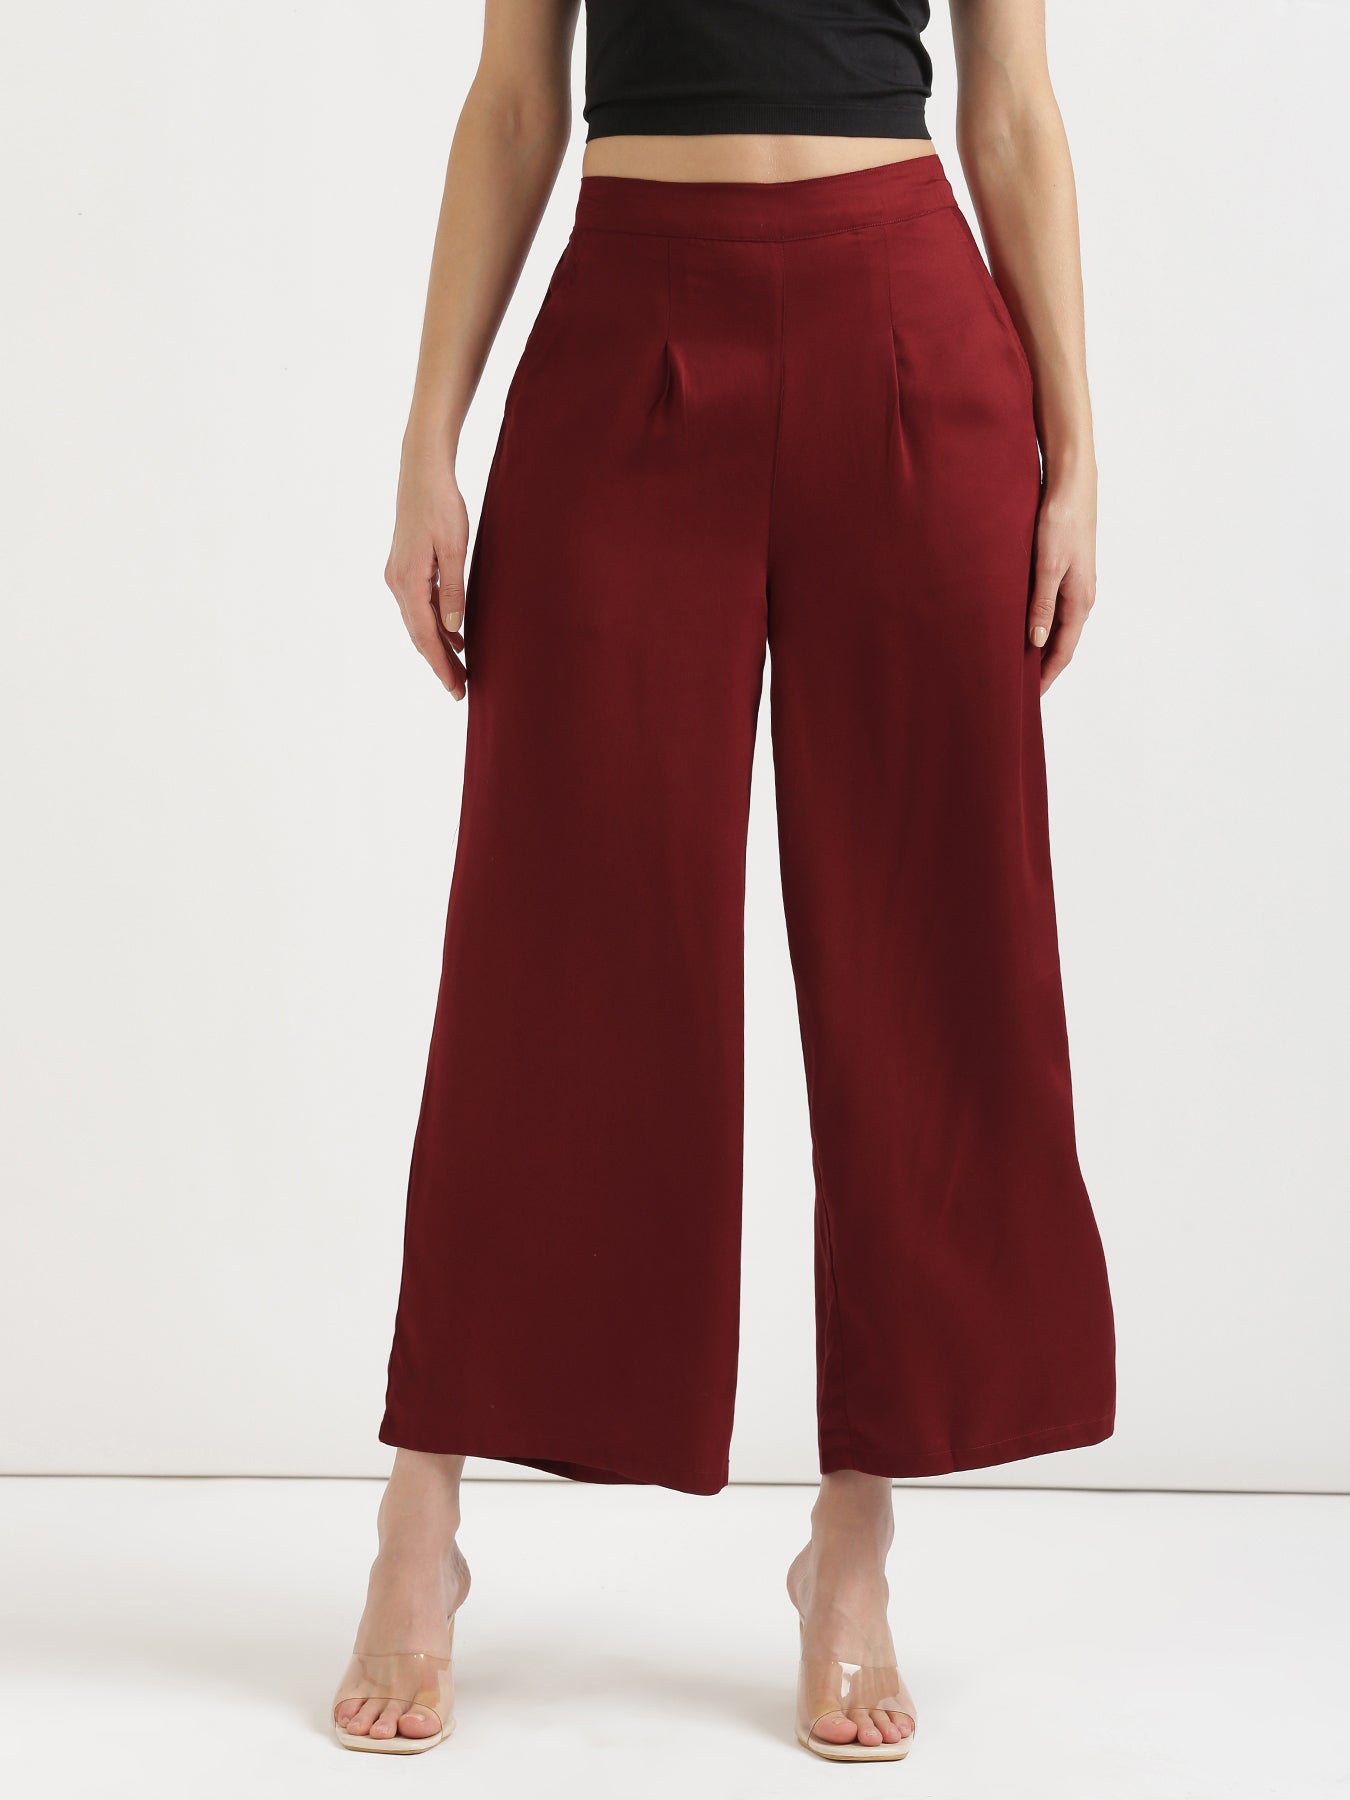 Buy MOOMAYA Women's Solid Palazzo Pants High Waist Ankle Length Wide Leg  Trousers | Shoppers Stop